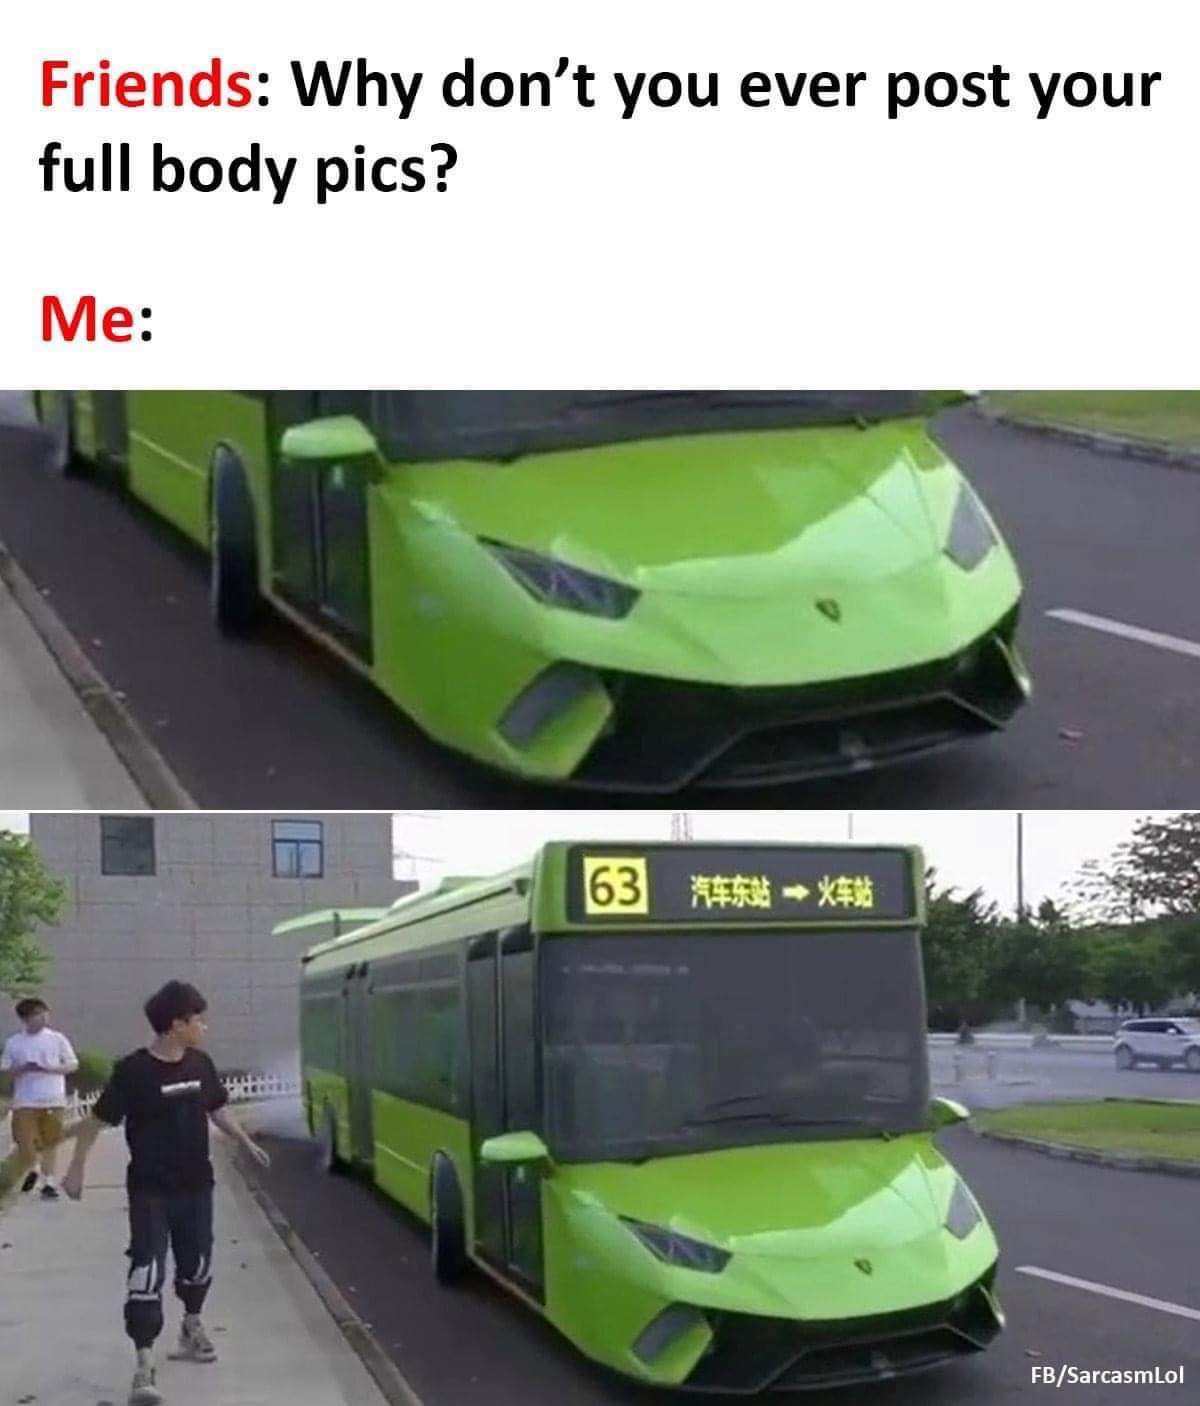 lamborghini bus - Friends Why don't you ever post your full body pics? Me 63 Test X FbSarcasmLol